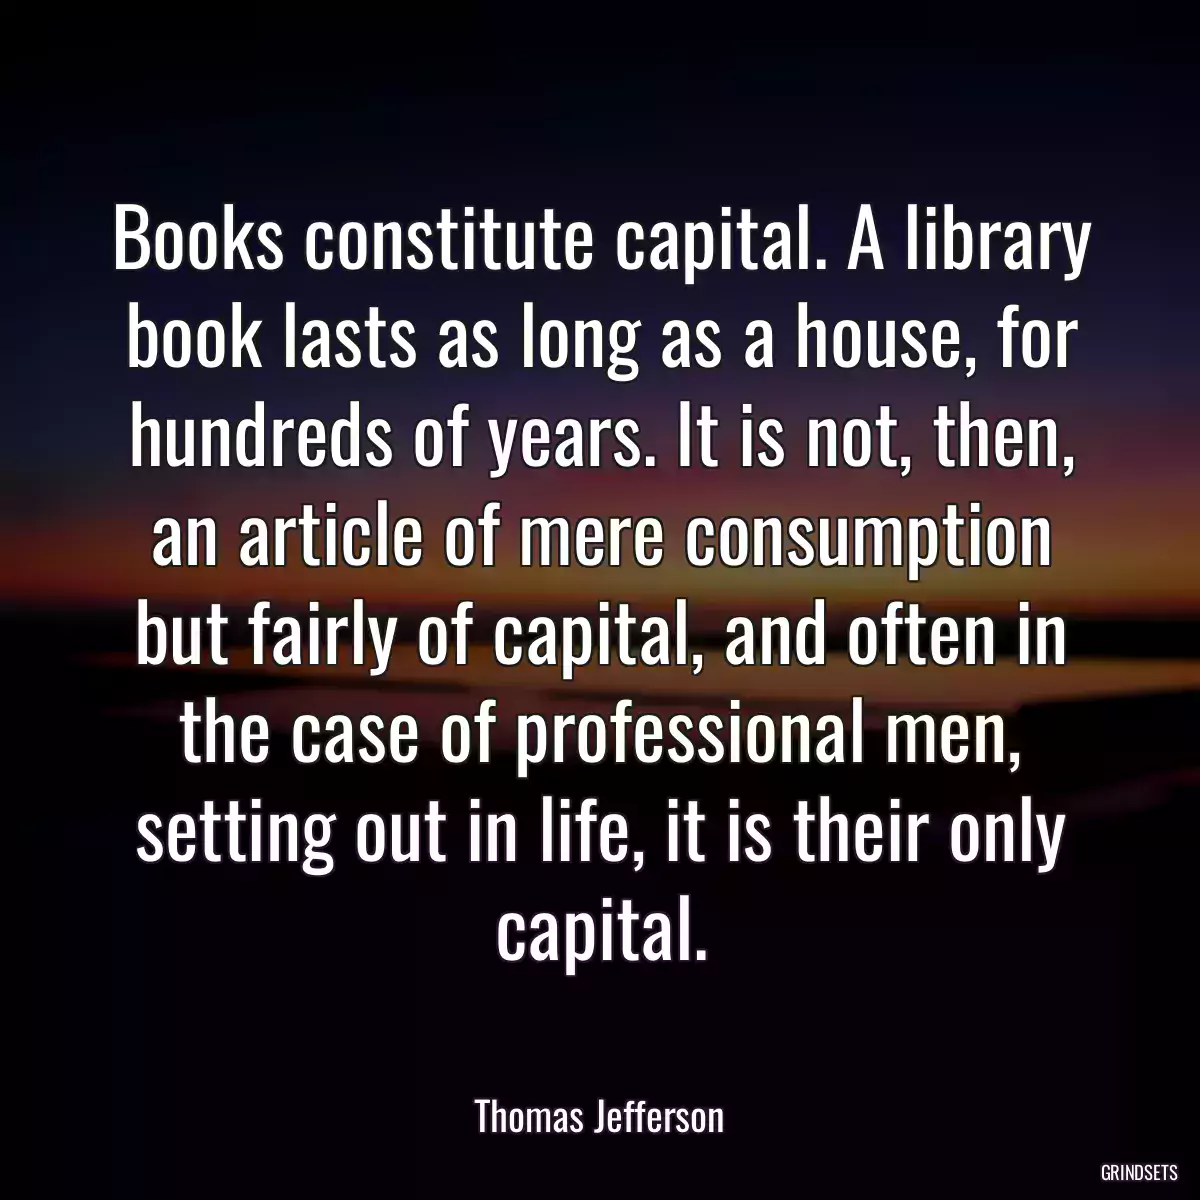 Books constitute capital. A library book lasts as long as a house, for hundreds of years. It is not, then, an article of mere consumption but fairly of capital, and often in the case of professional men, setting out in life, it is their only capital.